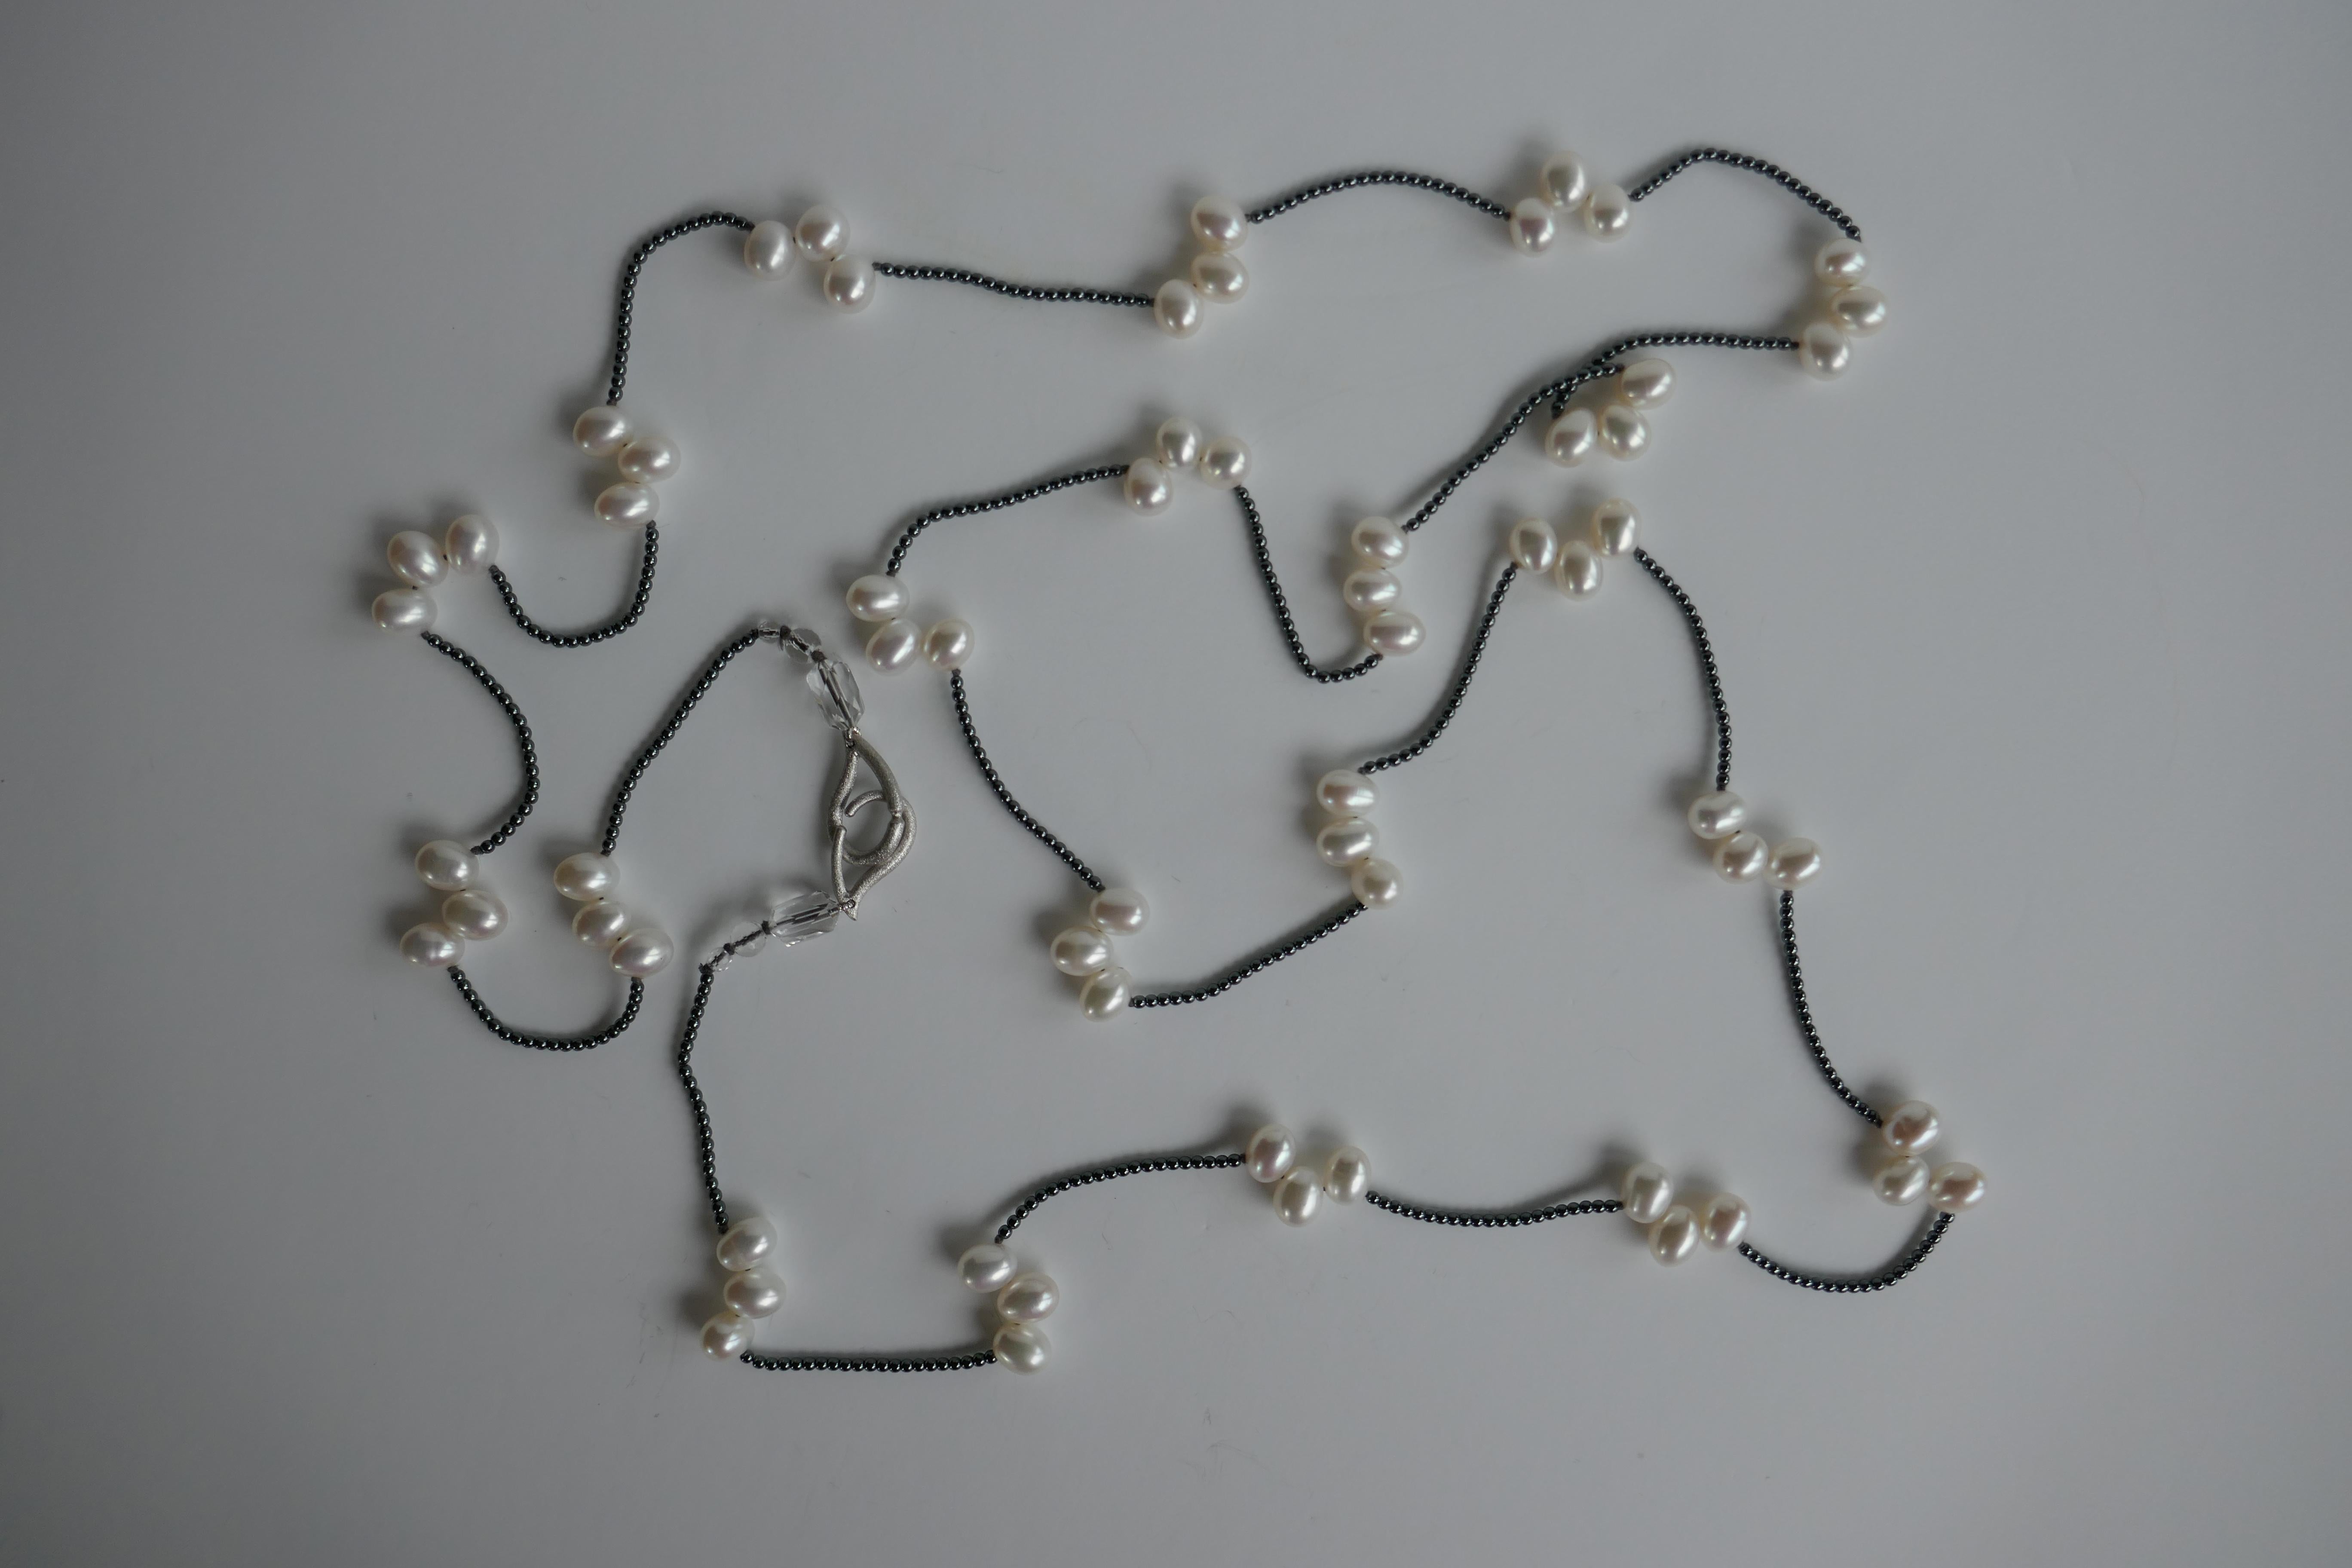 This necklace is made of 2mm hematite beads and white drop cultured pearls. It is finished with rock crystal and a 925 sterling silver clasp.  It is strung on grey silk thread and knotted. Besides being able to wear it six different ways it may also